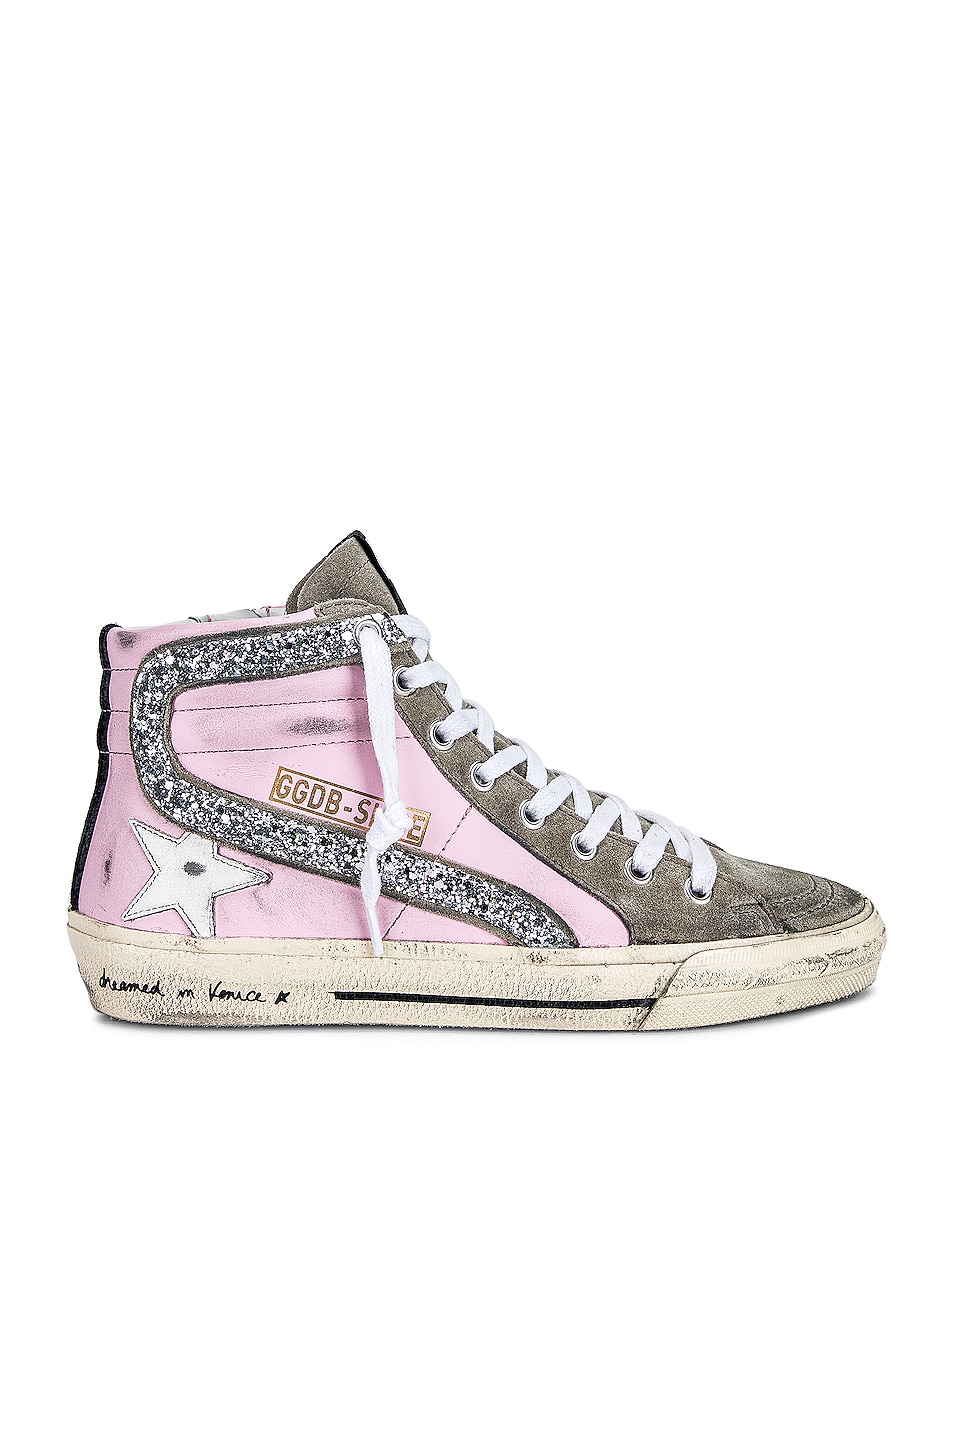 Image 1 of Golden Goose Slide Sneaker in Orchid Pink, Taupe, White, Black, & Silver